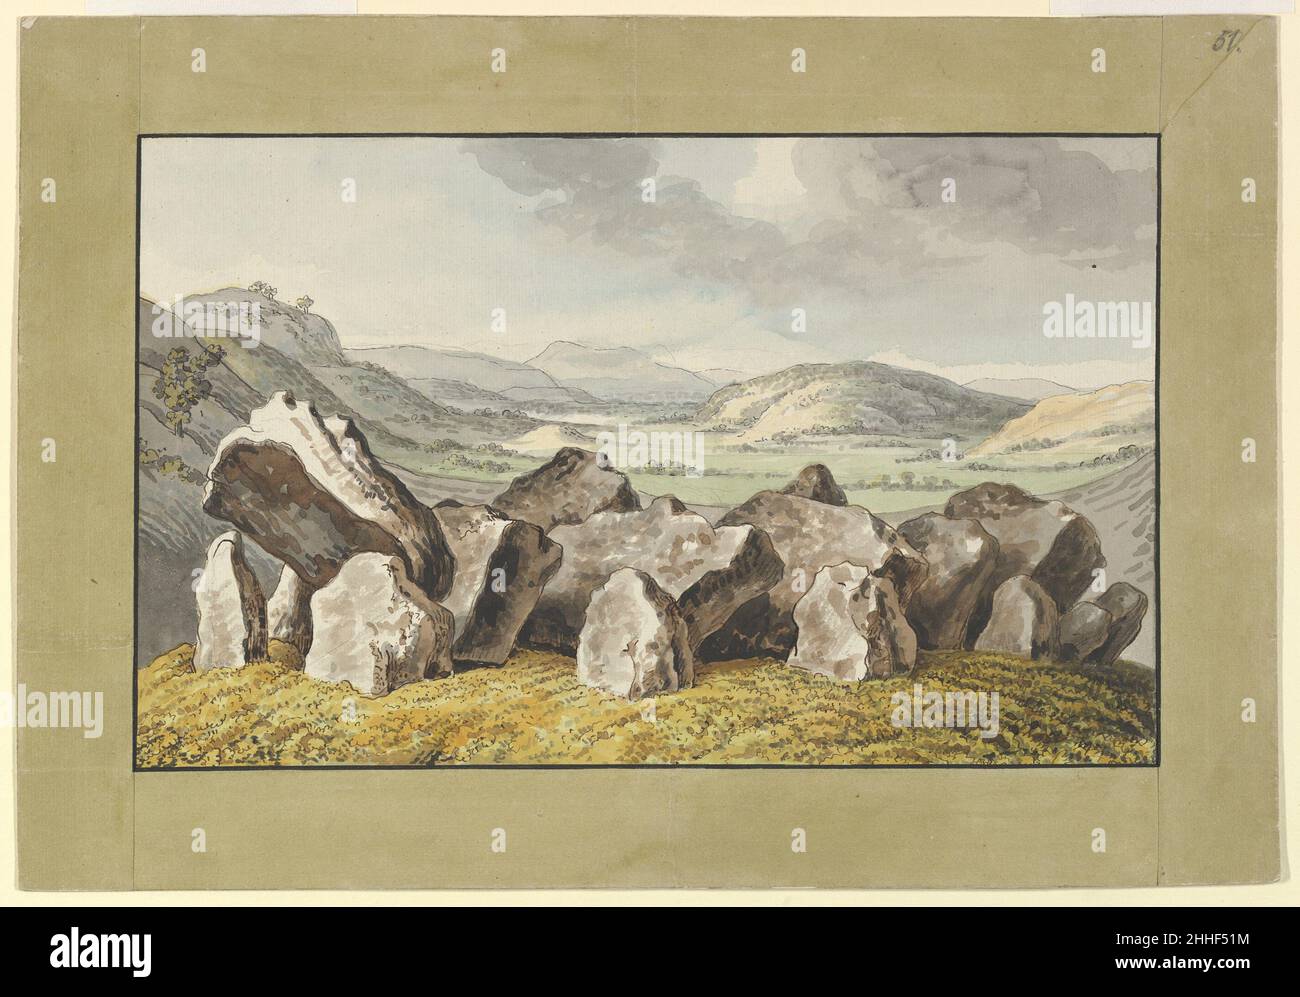 A Prehistoric Stone Circle on a Mound, an Extensive Landscape Beyond mid-18th–early 19th century Johann Heinrich Wilhelm Tischbein German Tischbein's finished drawing of giant stones set in a deserted landscape reflect northern Europe's romantic fascination with its own prehistoric past in the early nineteenth century. These rough-hewn boulders, some fallen, some still in ritual formation, hint at ancient mysteries. A related preliminary drawing (2003.100) was probably made on location. Later, Tischbein here expanded his sketch into a finished watercolor, using pen lines to describe the divers Stock Photo